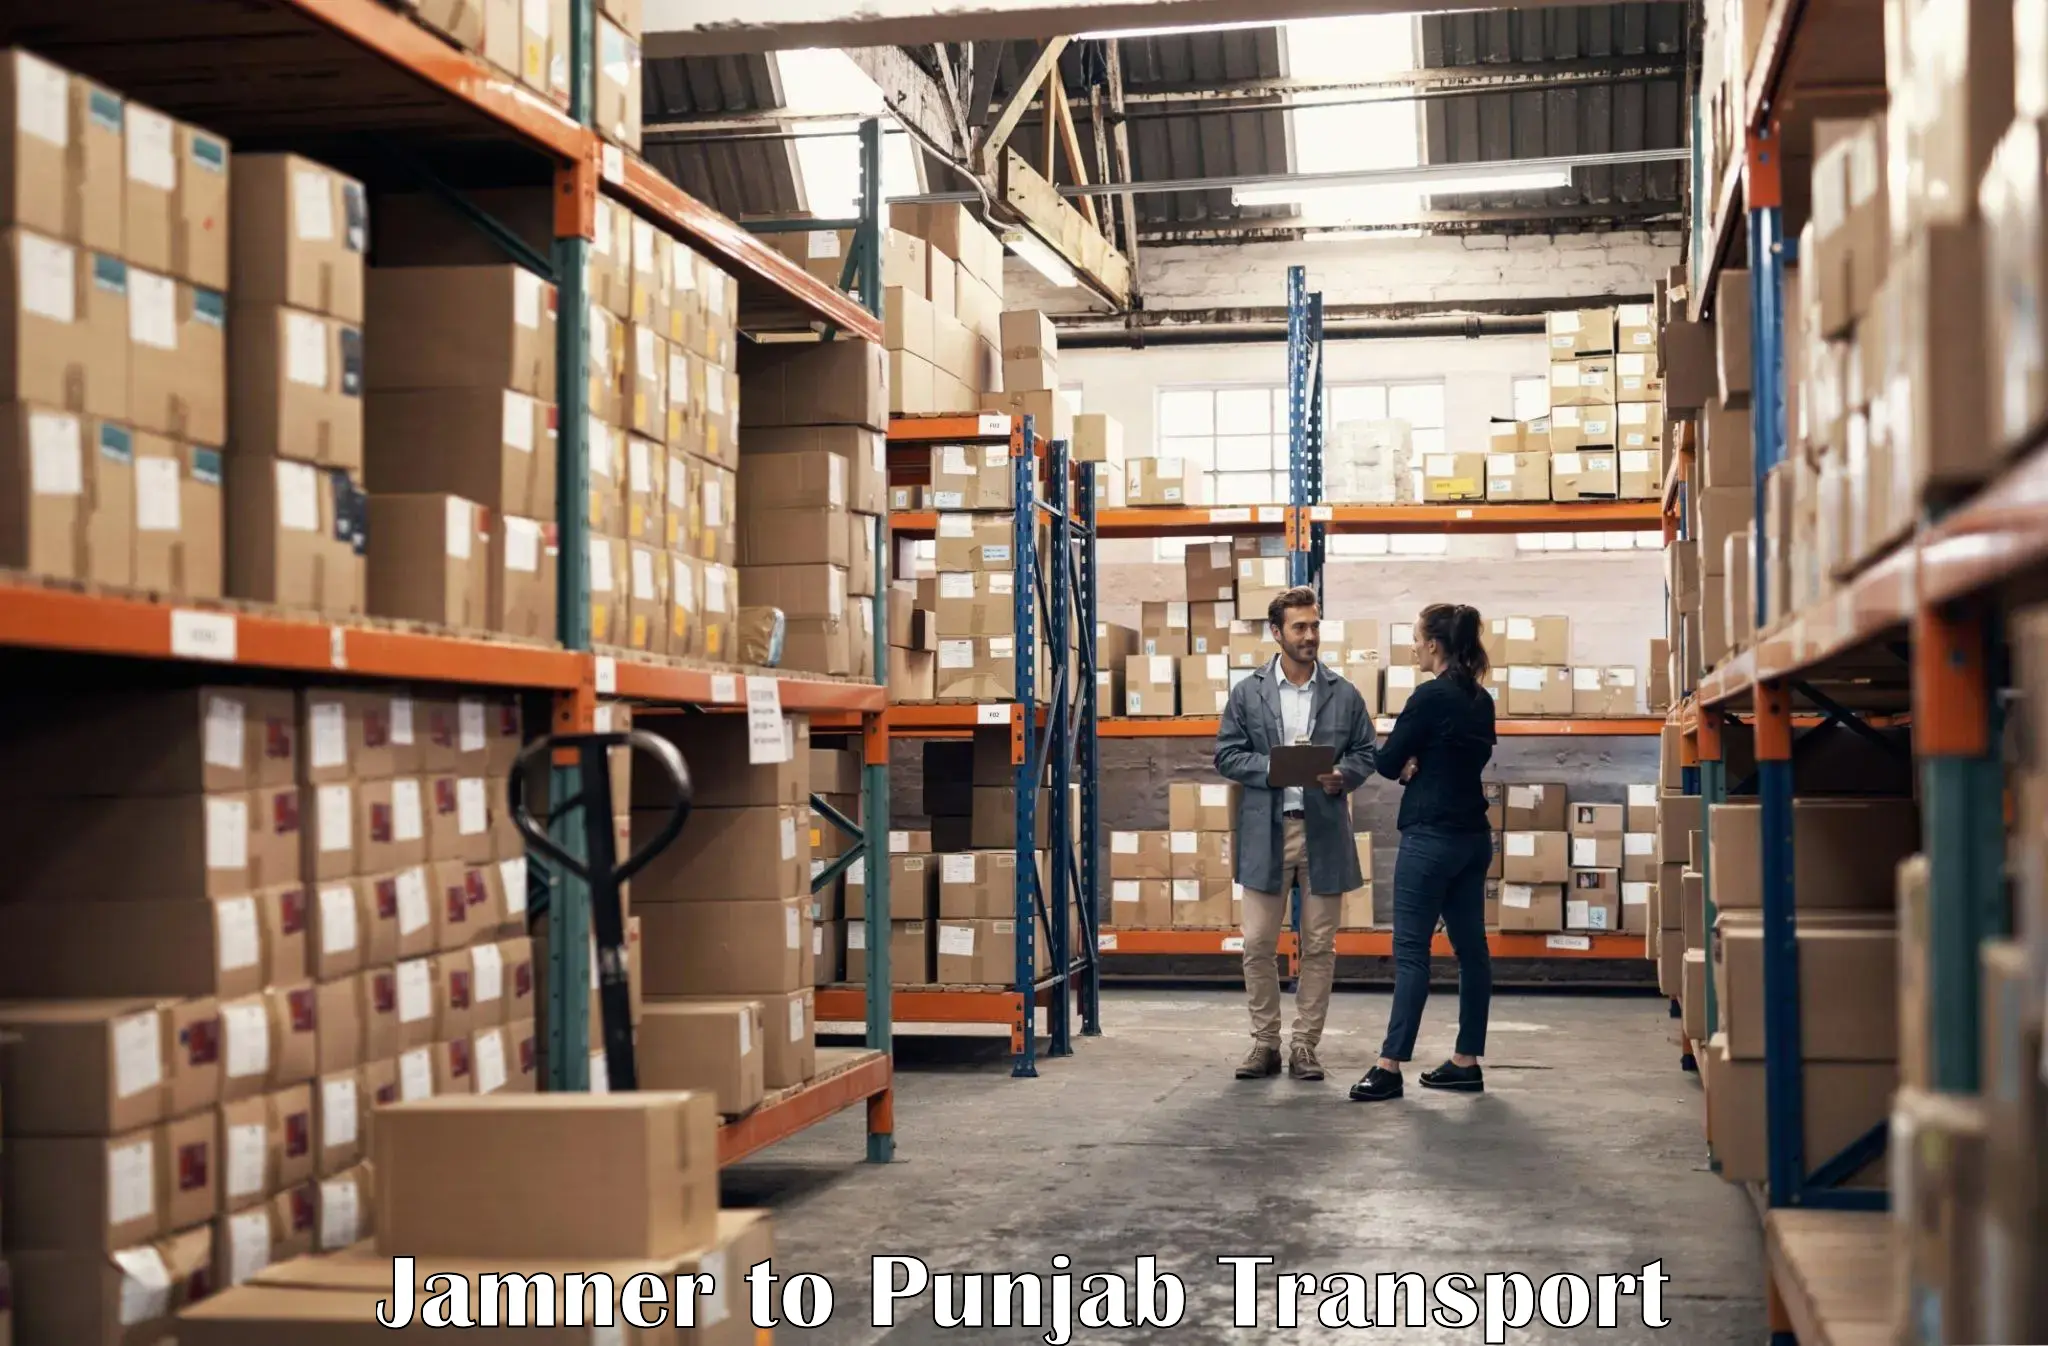 Daily parcel service transport Jamner to Sultanpur Lodhi